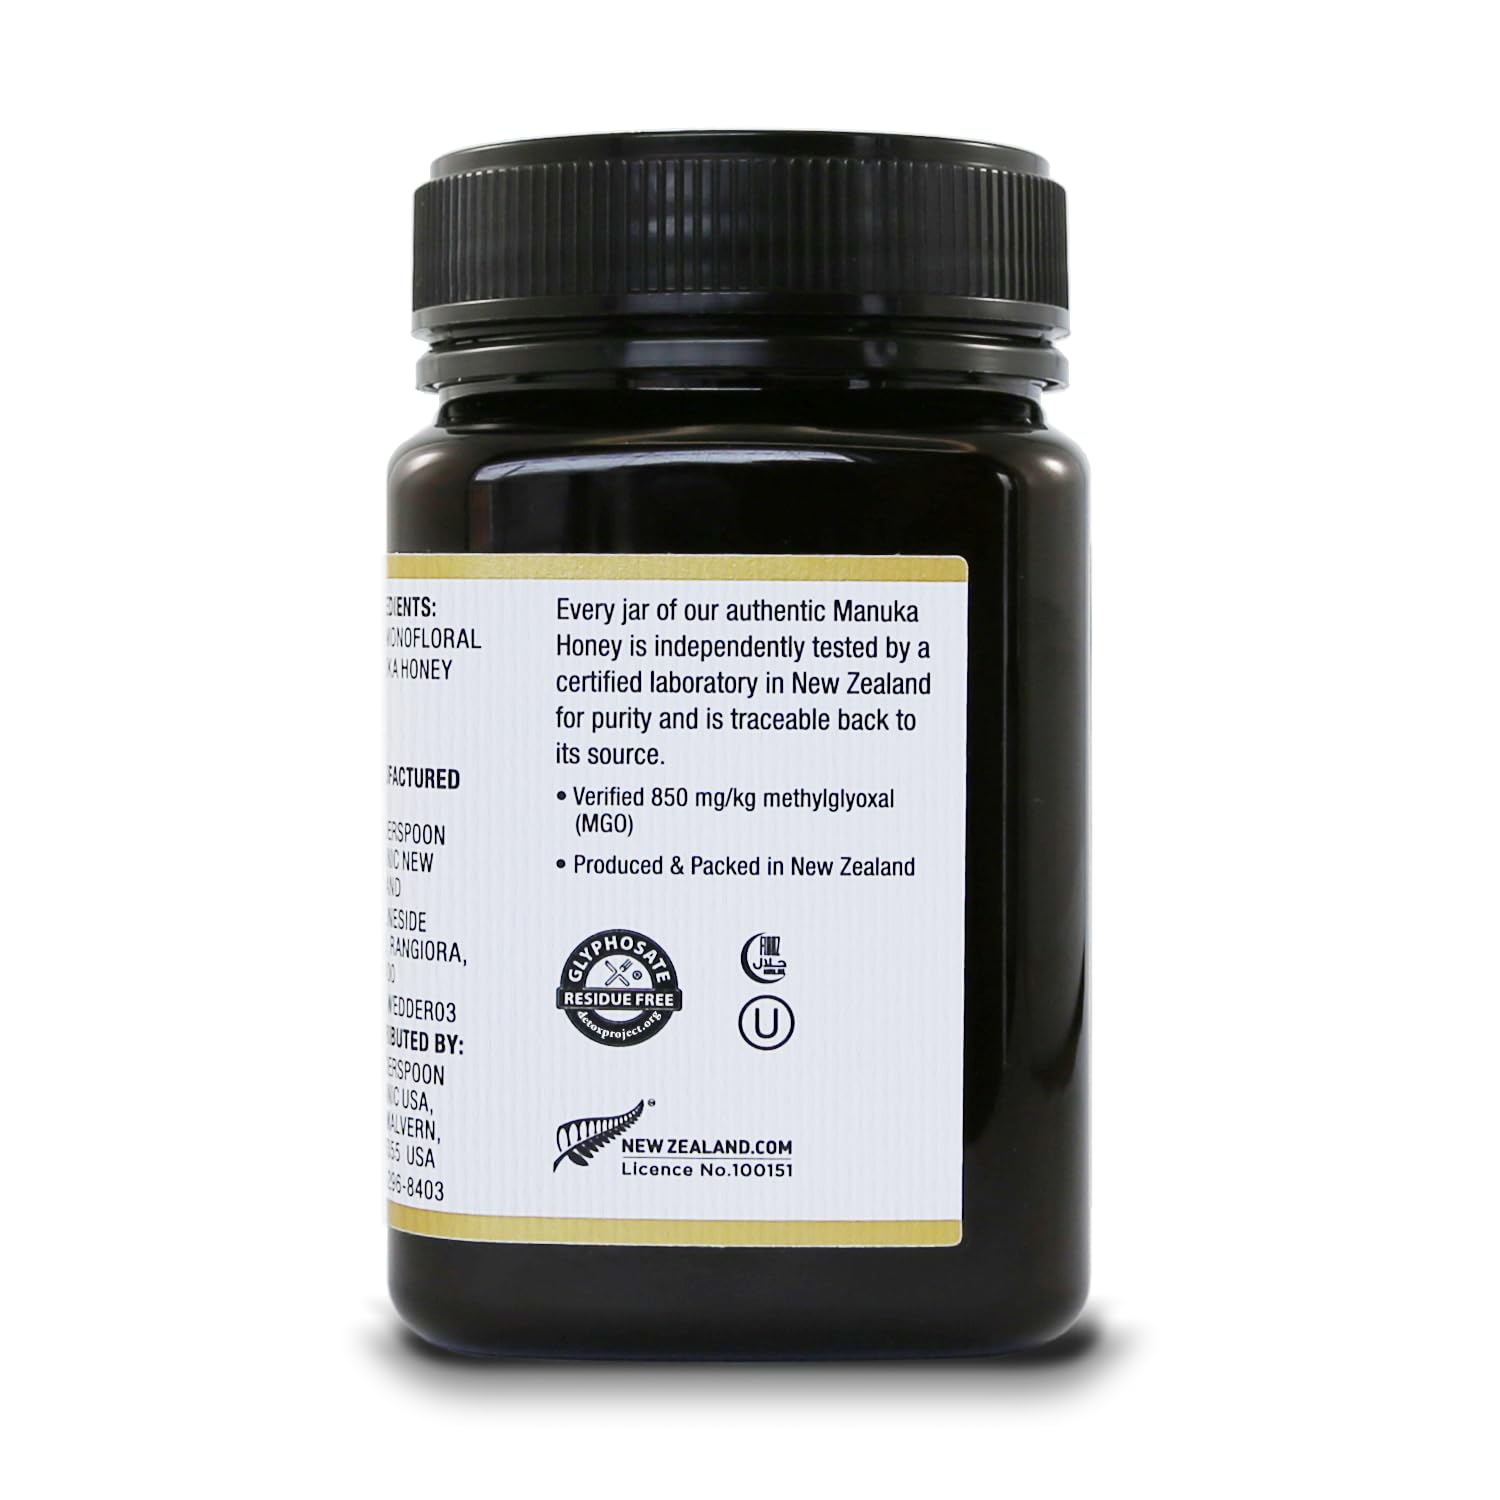 Wedderspoon Raw Premium Manuka Honey, MGO 850, 17.6 Oz, Unpasteurized New Zealand Honey, Traceable from Our Hives to Your Home : Grocery & Gourmet Food